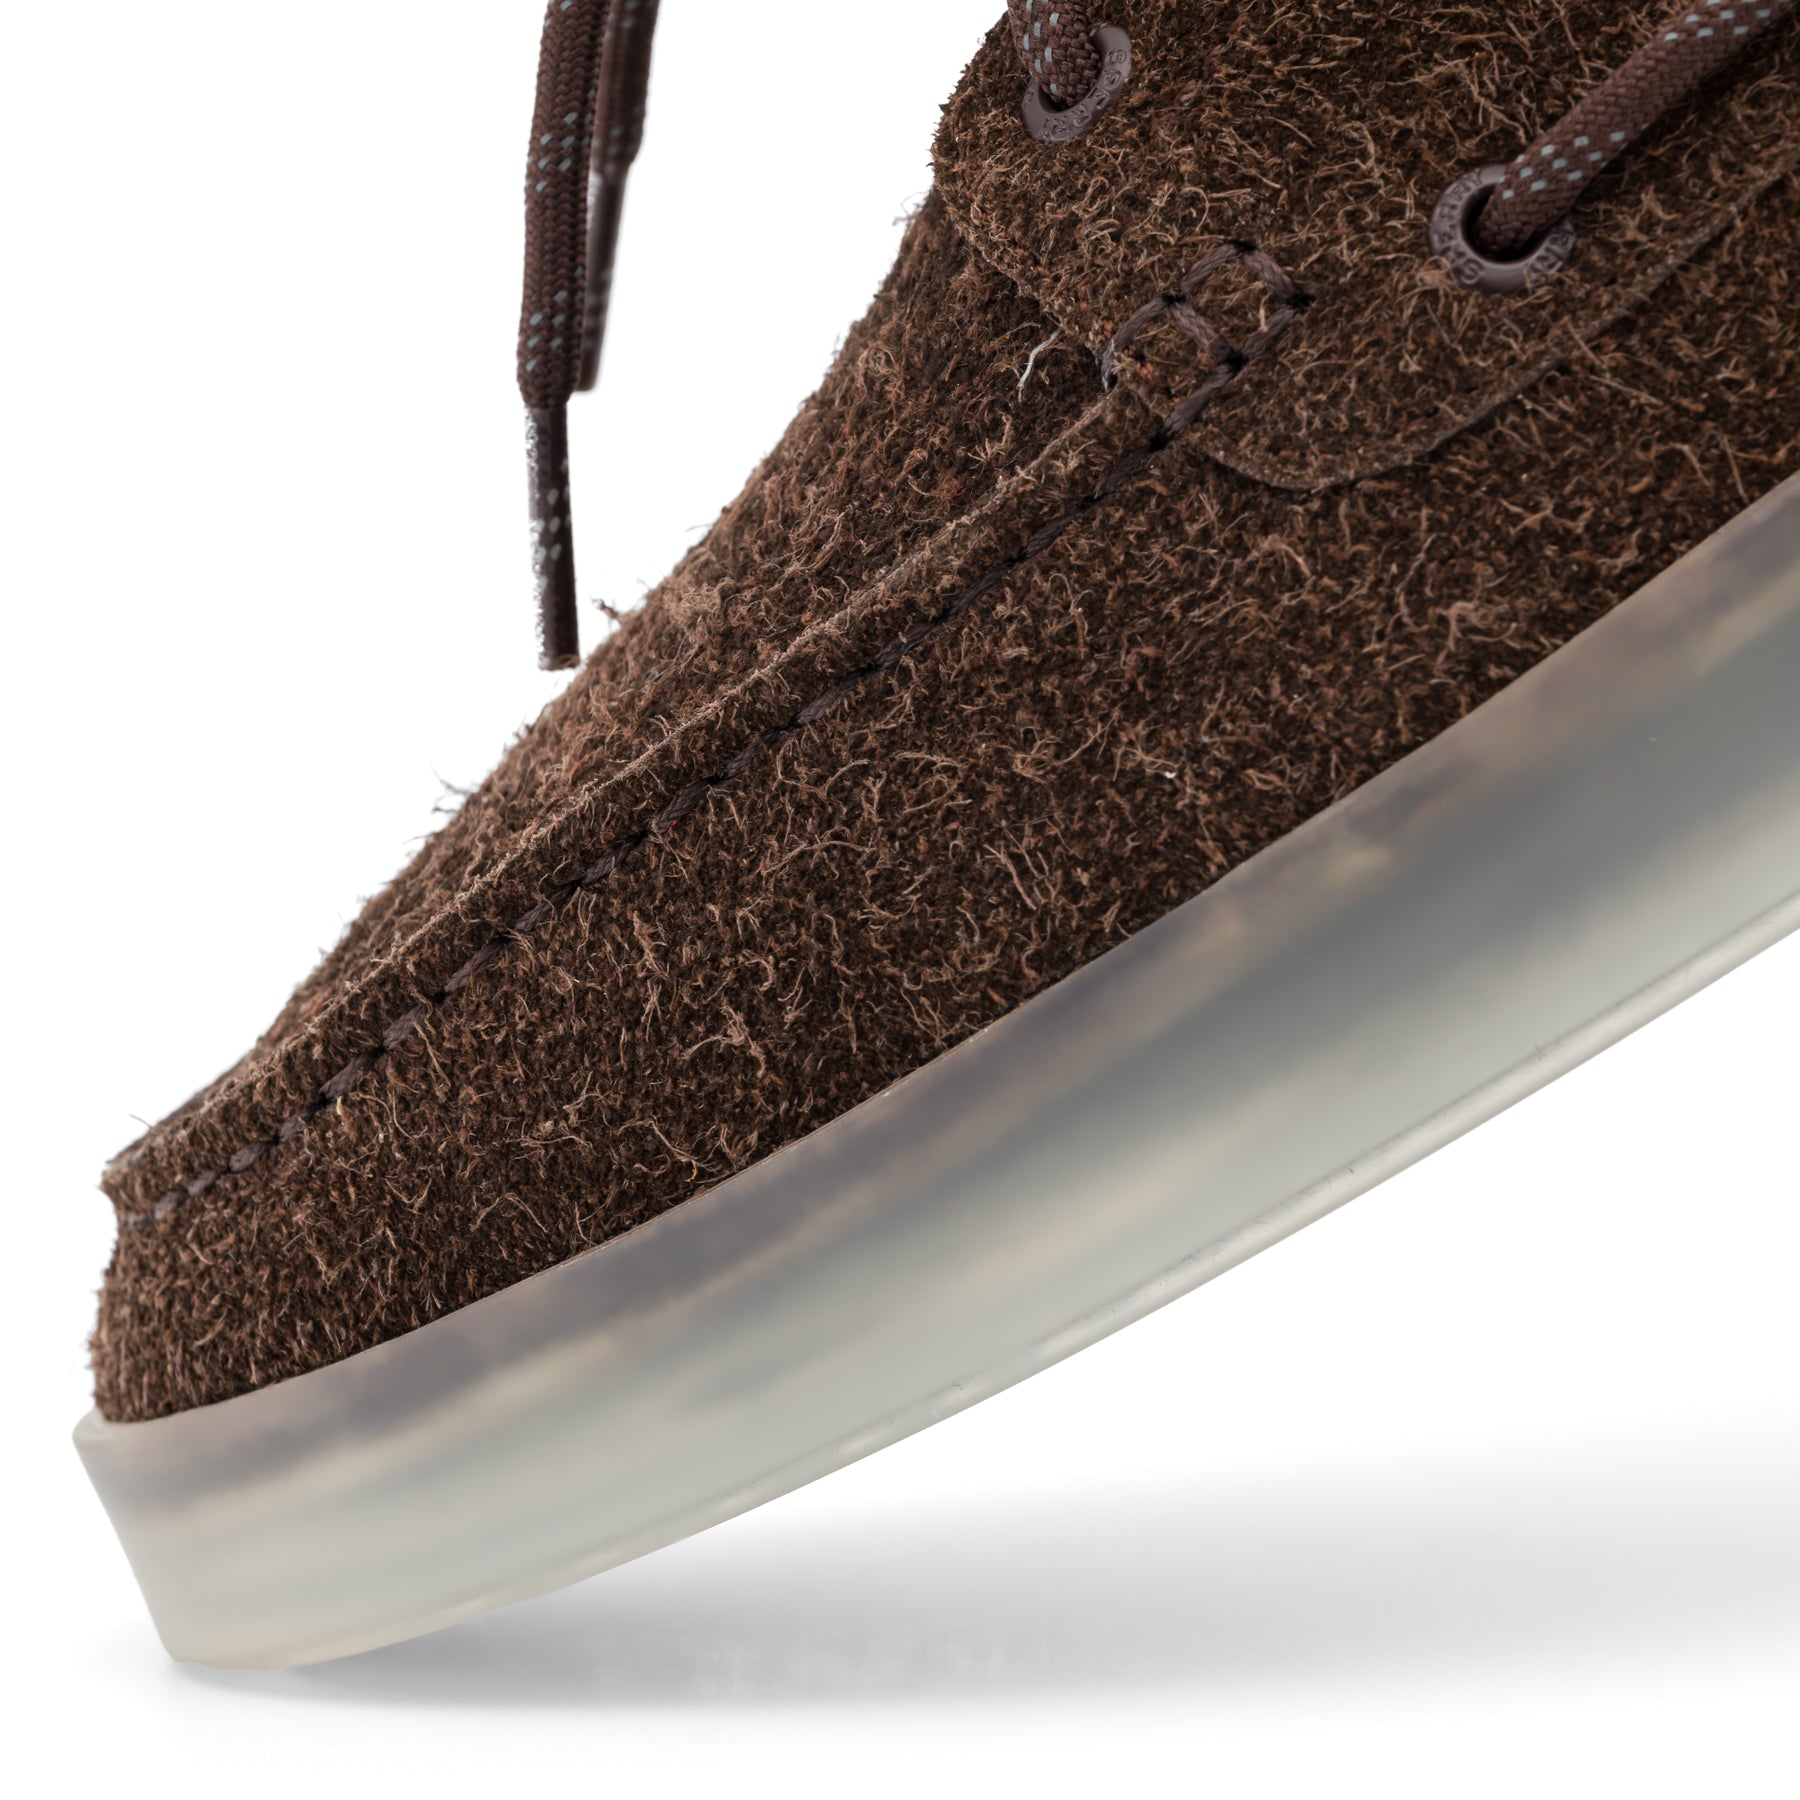 Concepts x Sperry Authentic Original 3-Eye Cup (Brown)